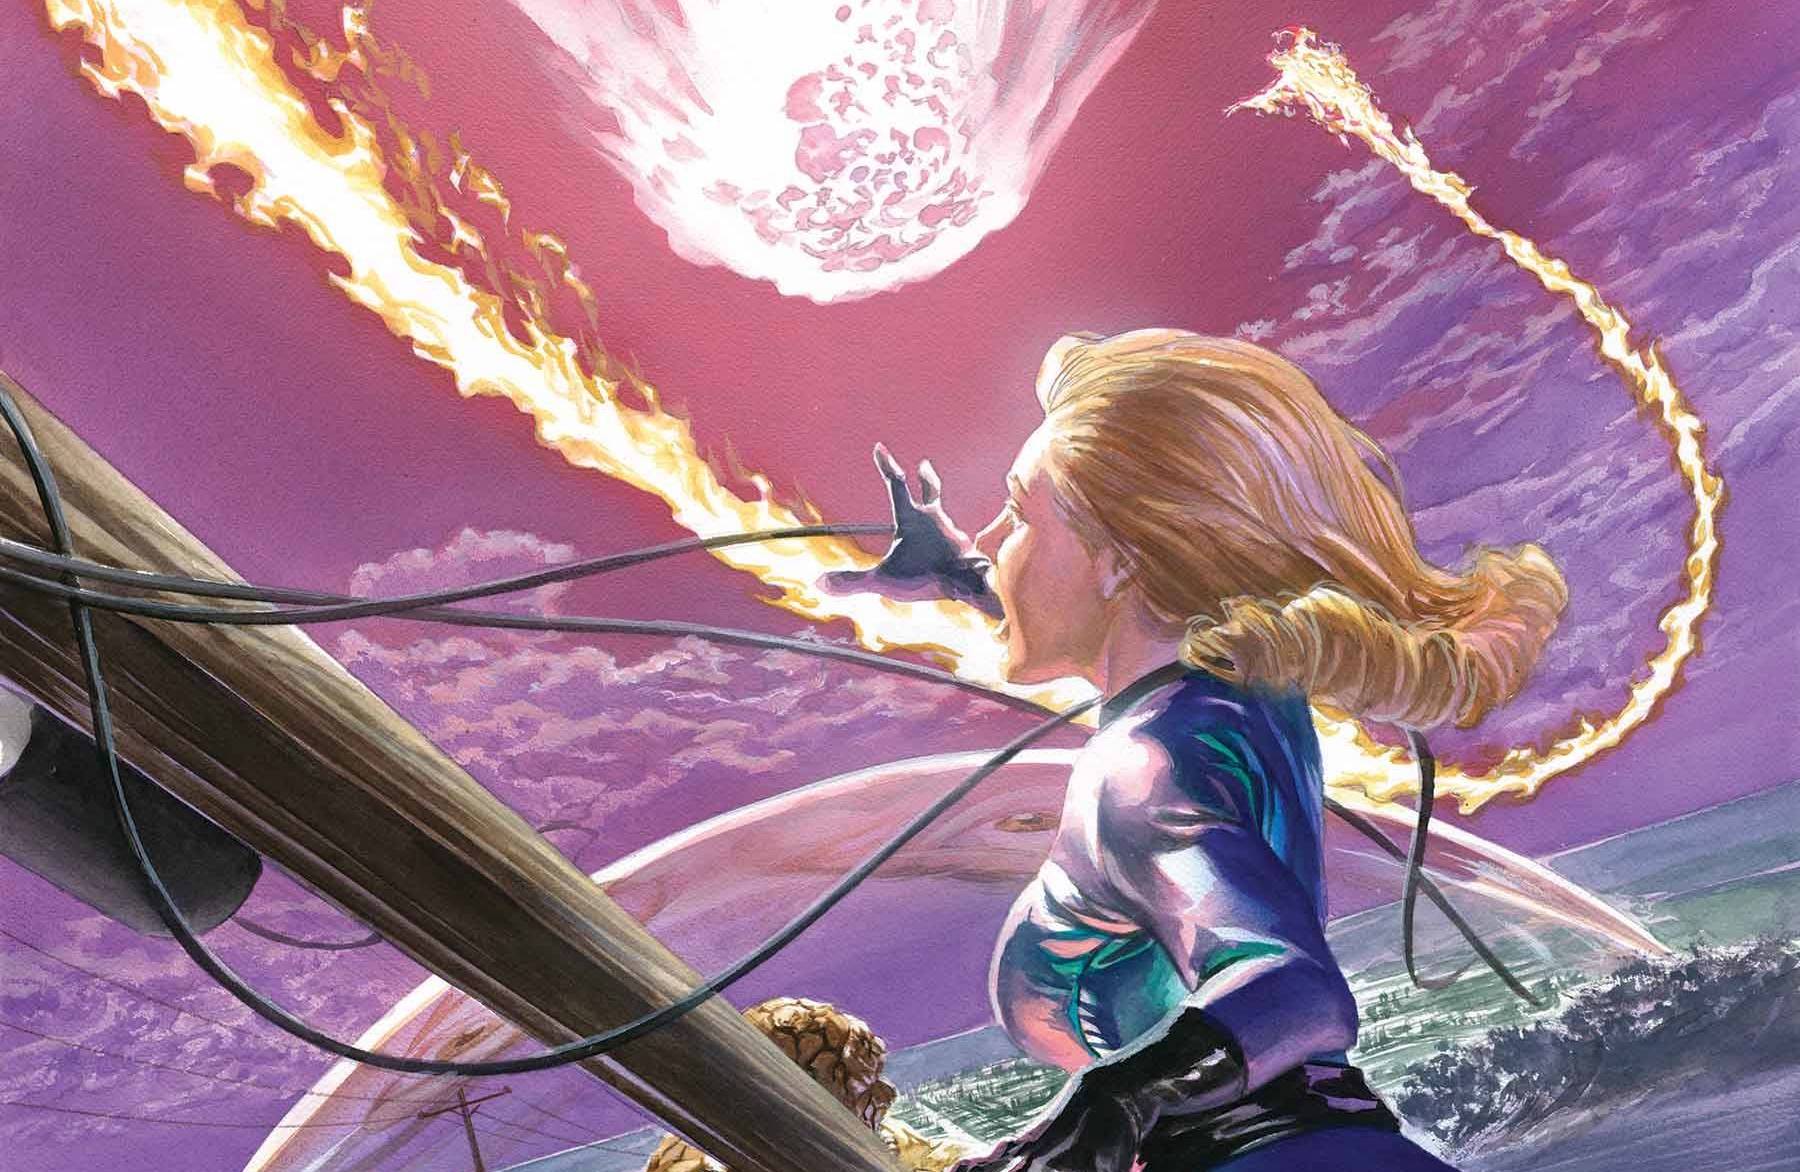 'Fantastic Four' #18 is as clever as it is revealing